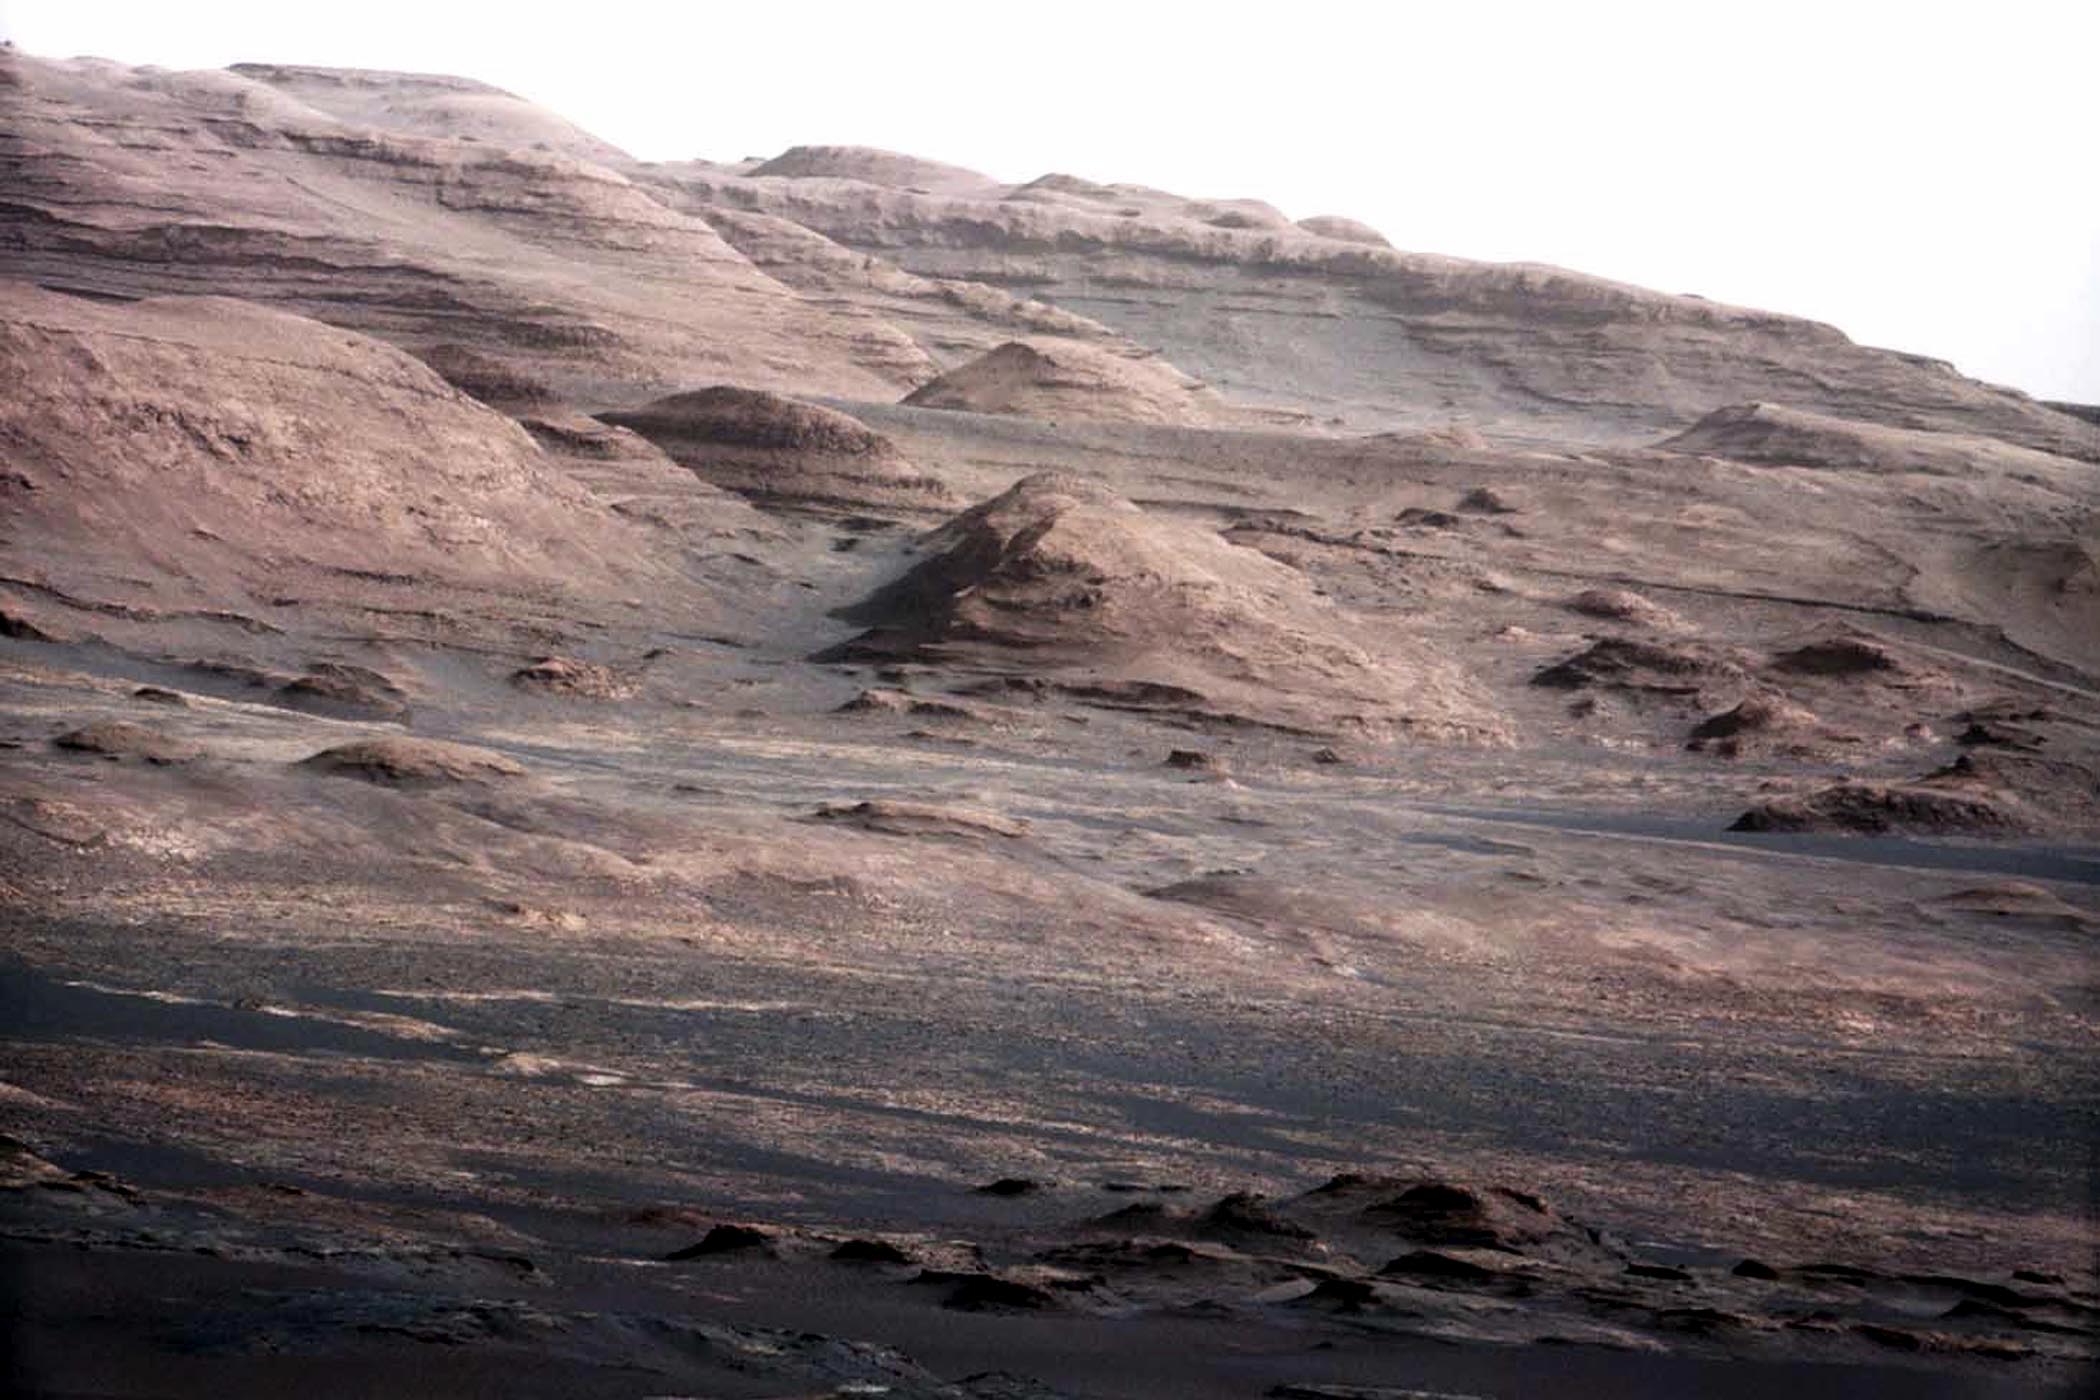 A detailed telephoto view from Curiosity shows Mount Sharp. The rover was expected to reach the 3.4-mile-high peak in February 2013, and the layered surface of the mountain should yield information to scientists on the planet's geological history.